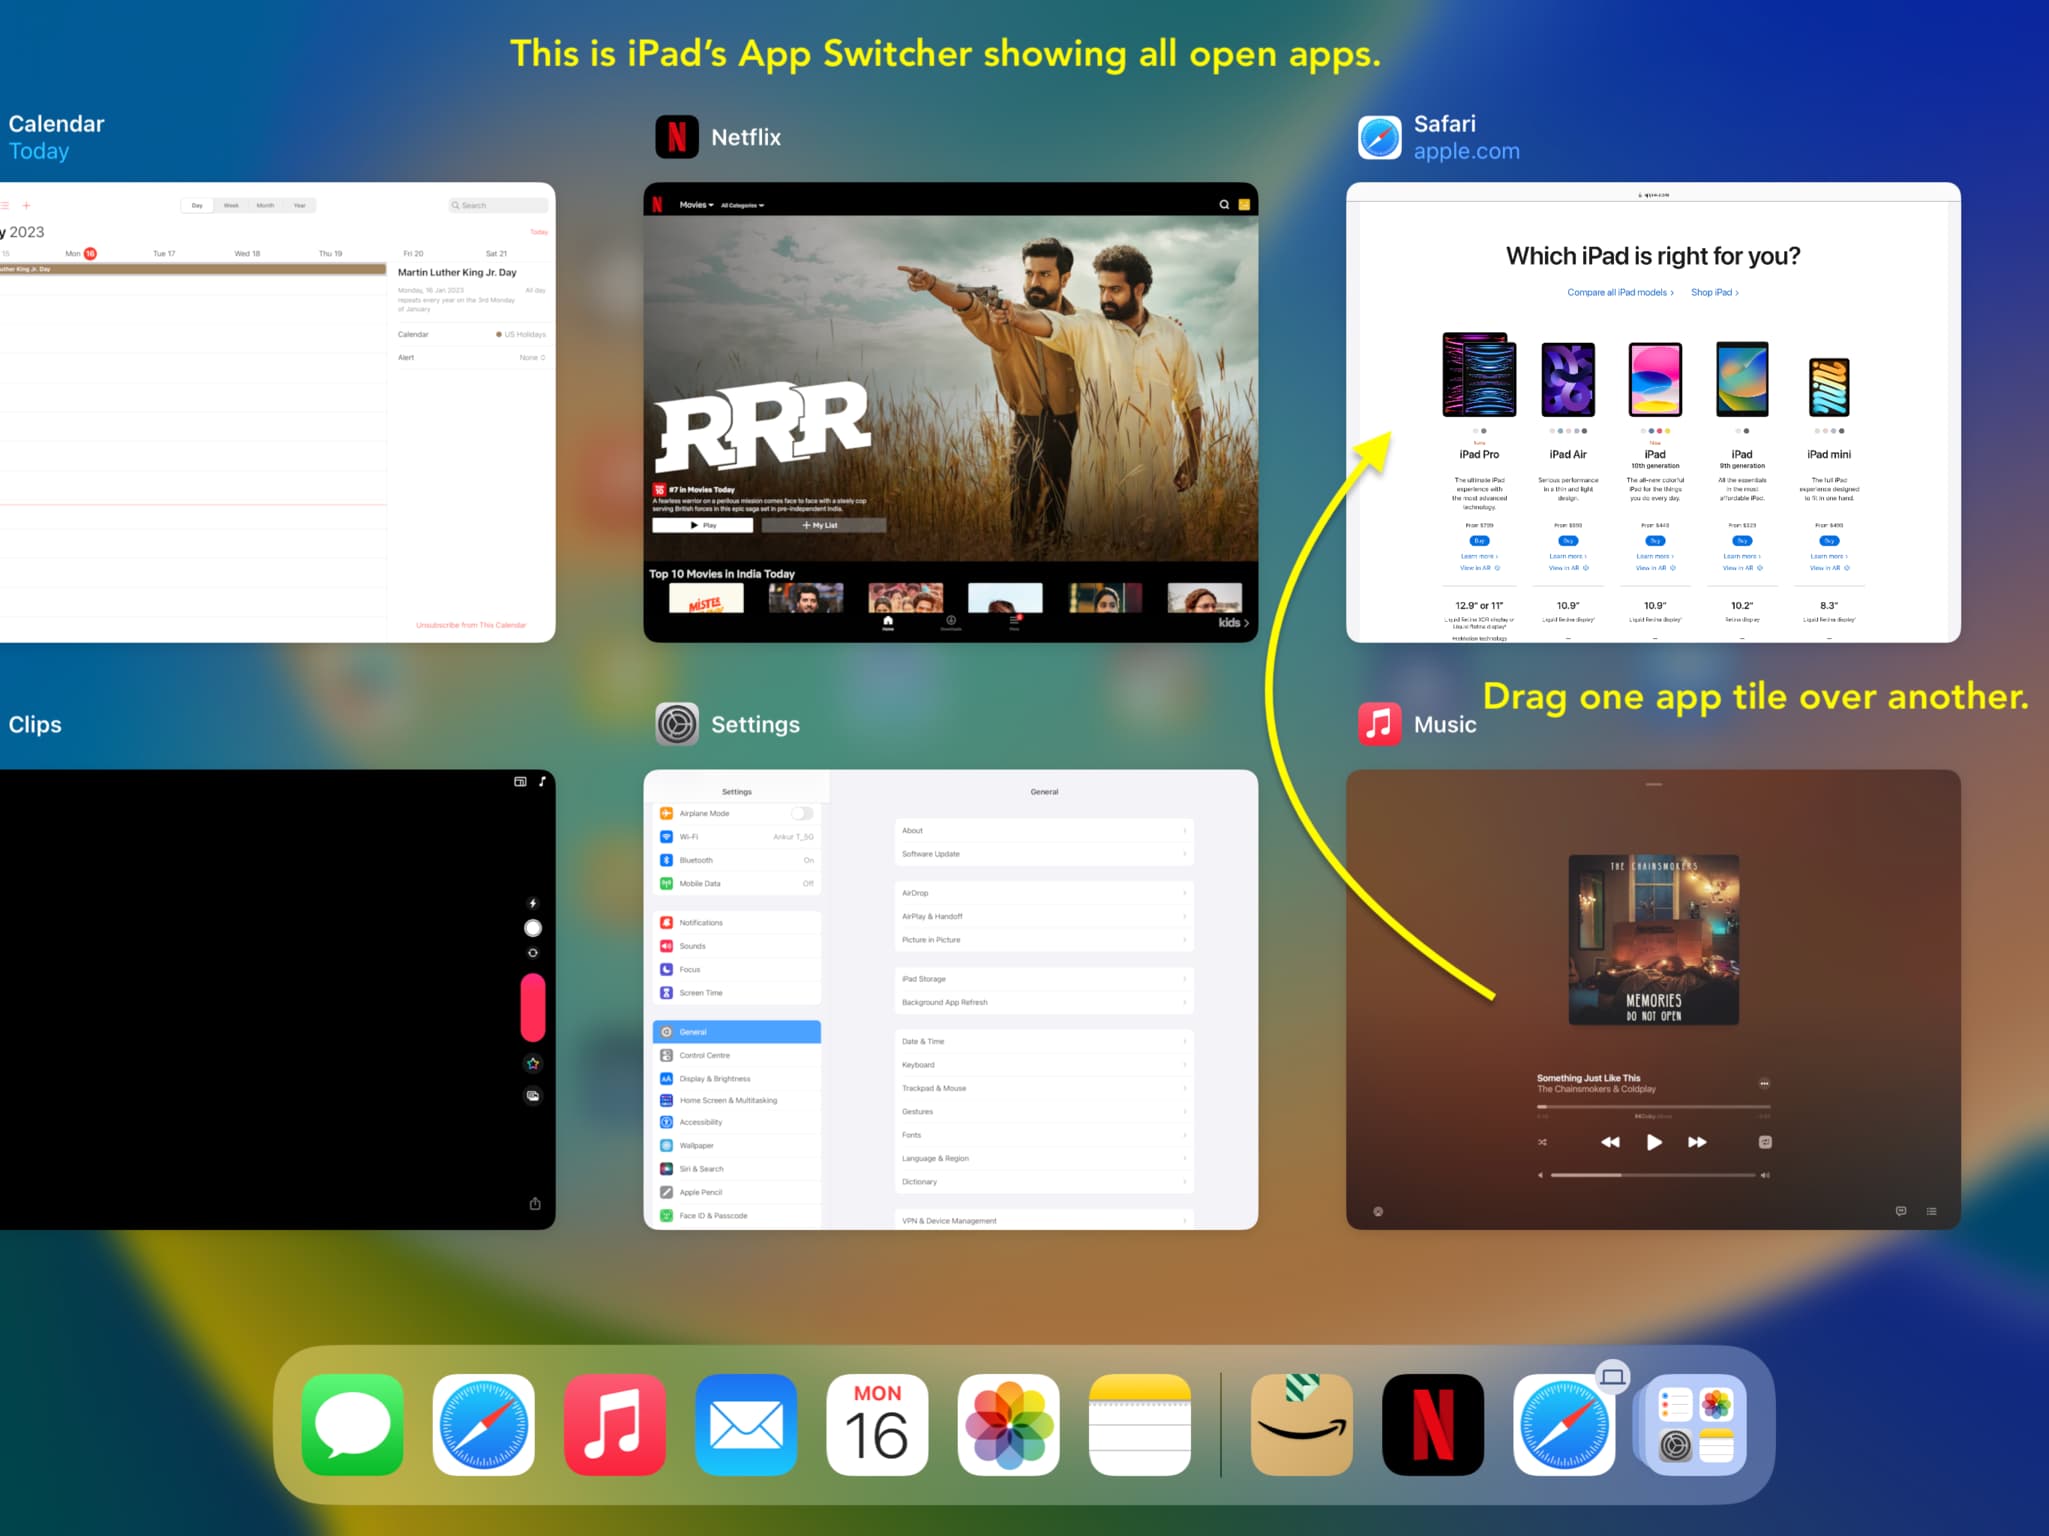 App Switcher on iPad showing several open apps